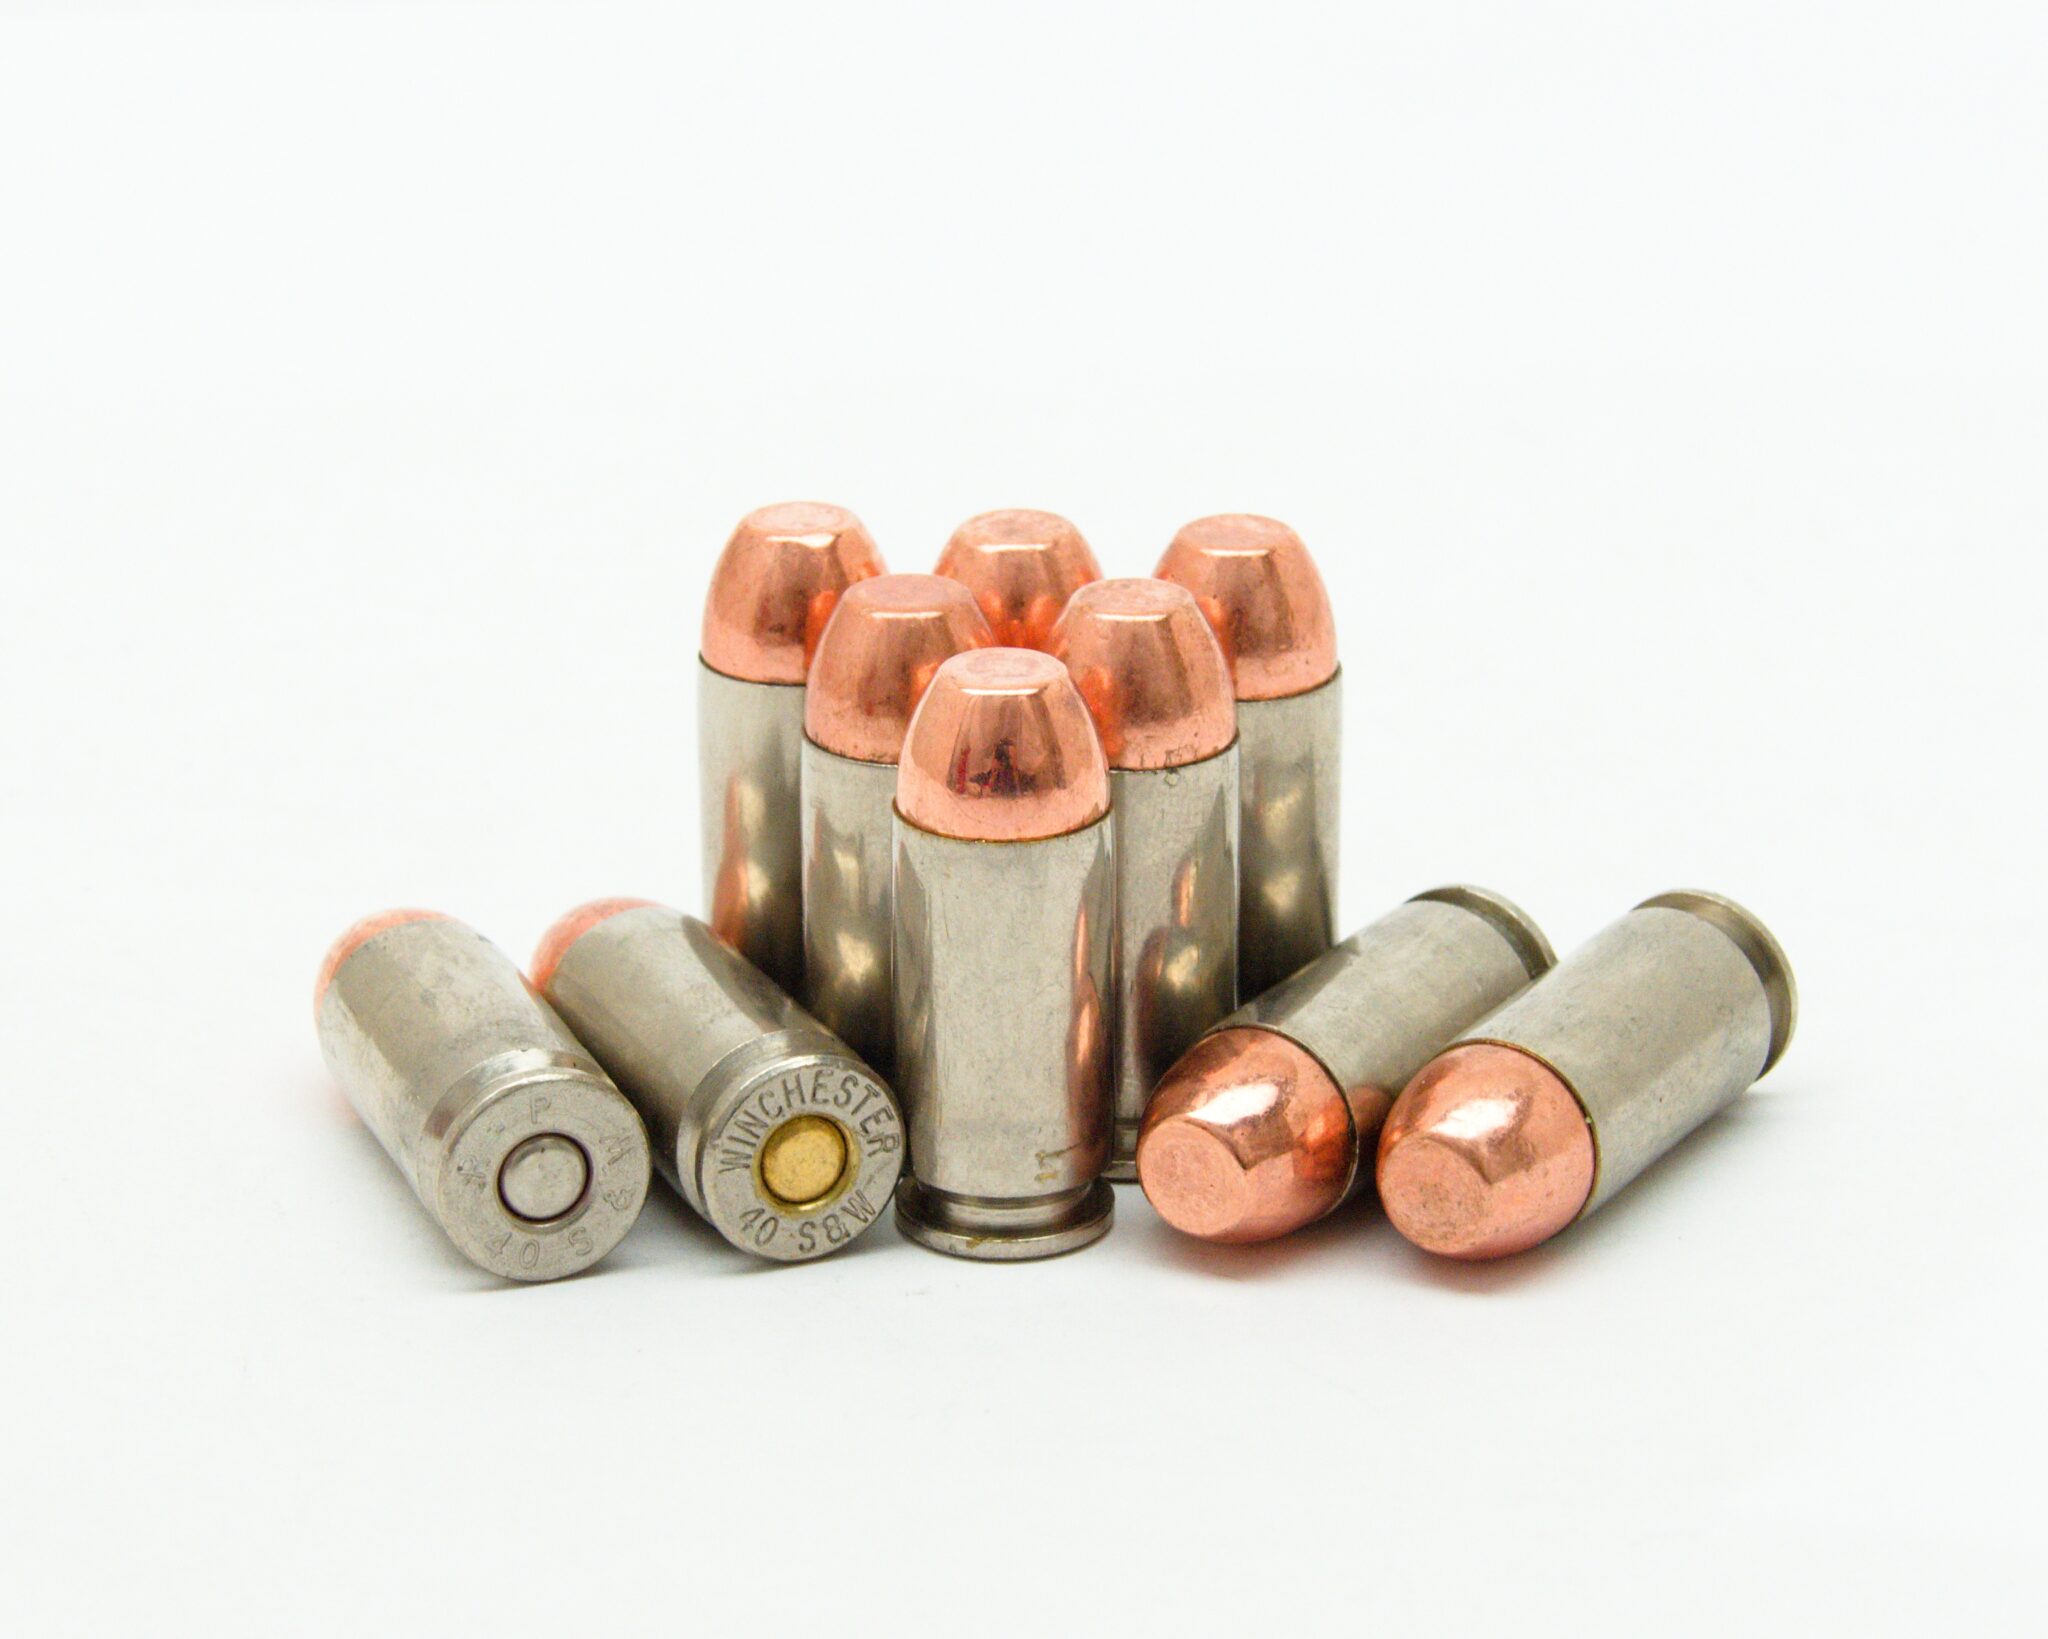 40 S&W 180 Grain Flat Nose Ammunition With Copper Plated Bullets 50 ...